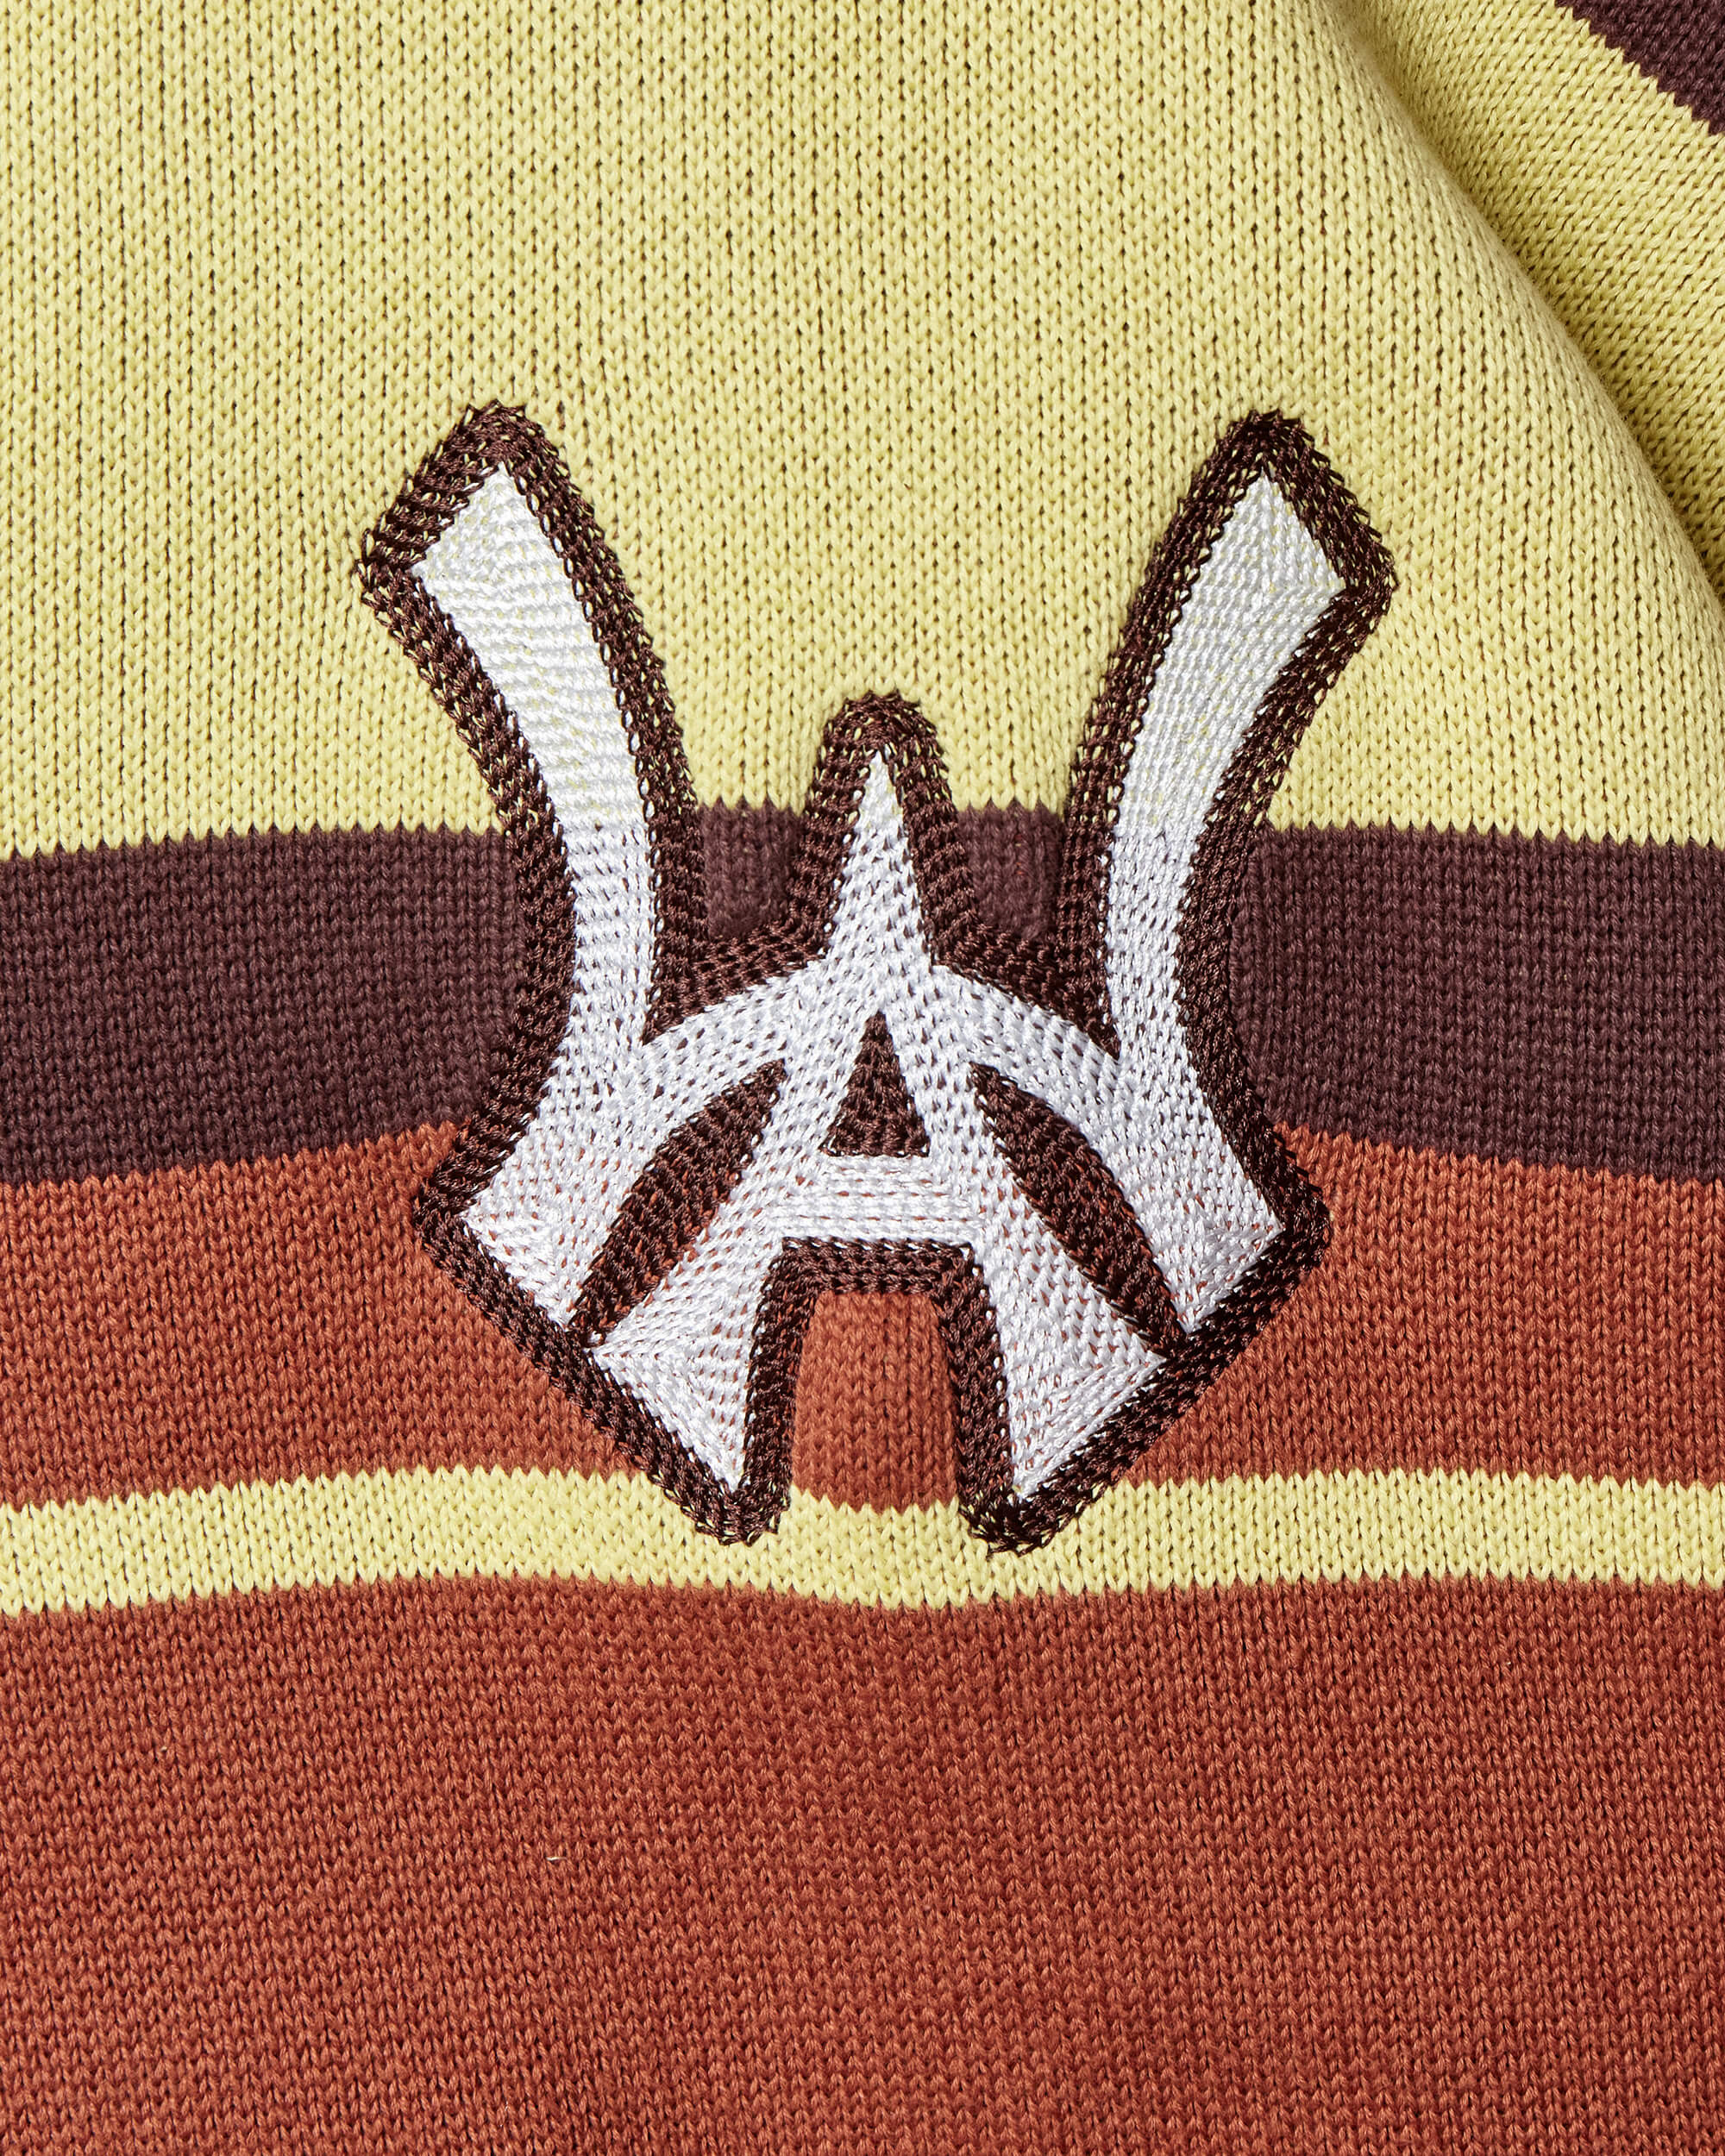 Closer look at the brand logo in a monogram font of connecting the "W" and "A" located on the upper left side of the sweater